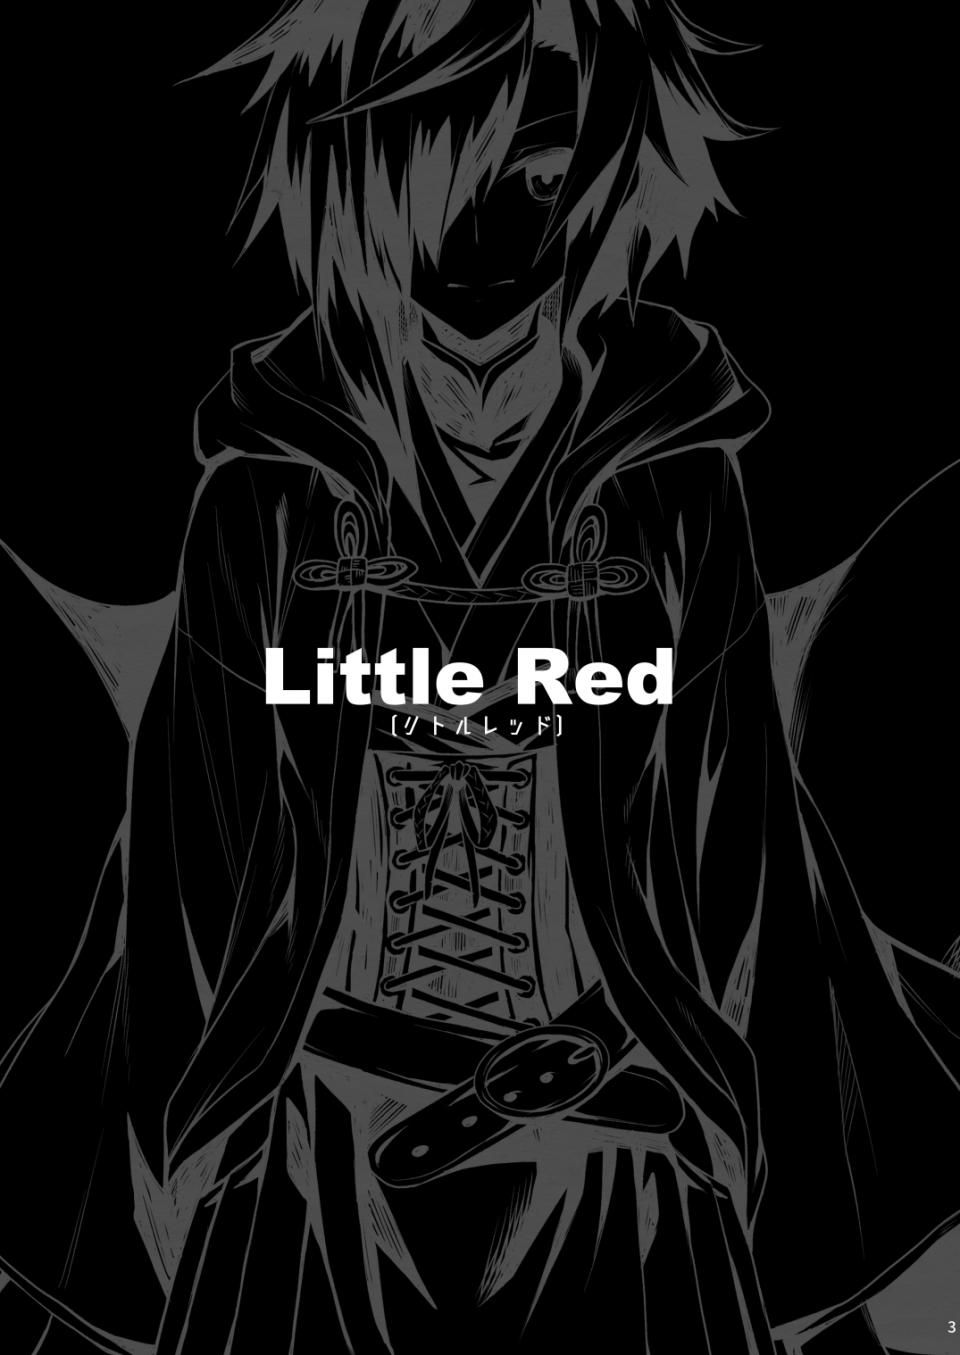 Take - Little Red - Photo #2